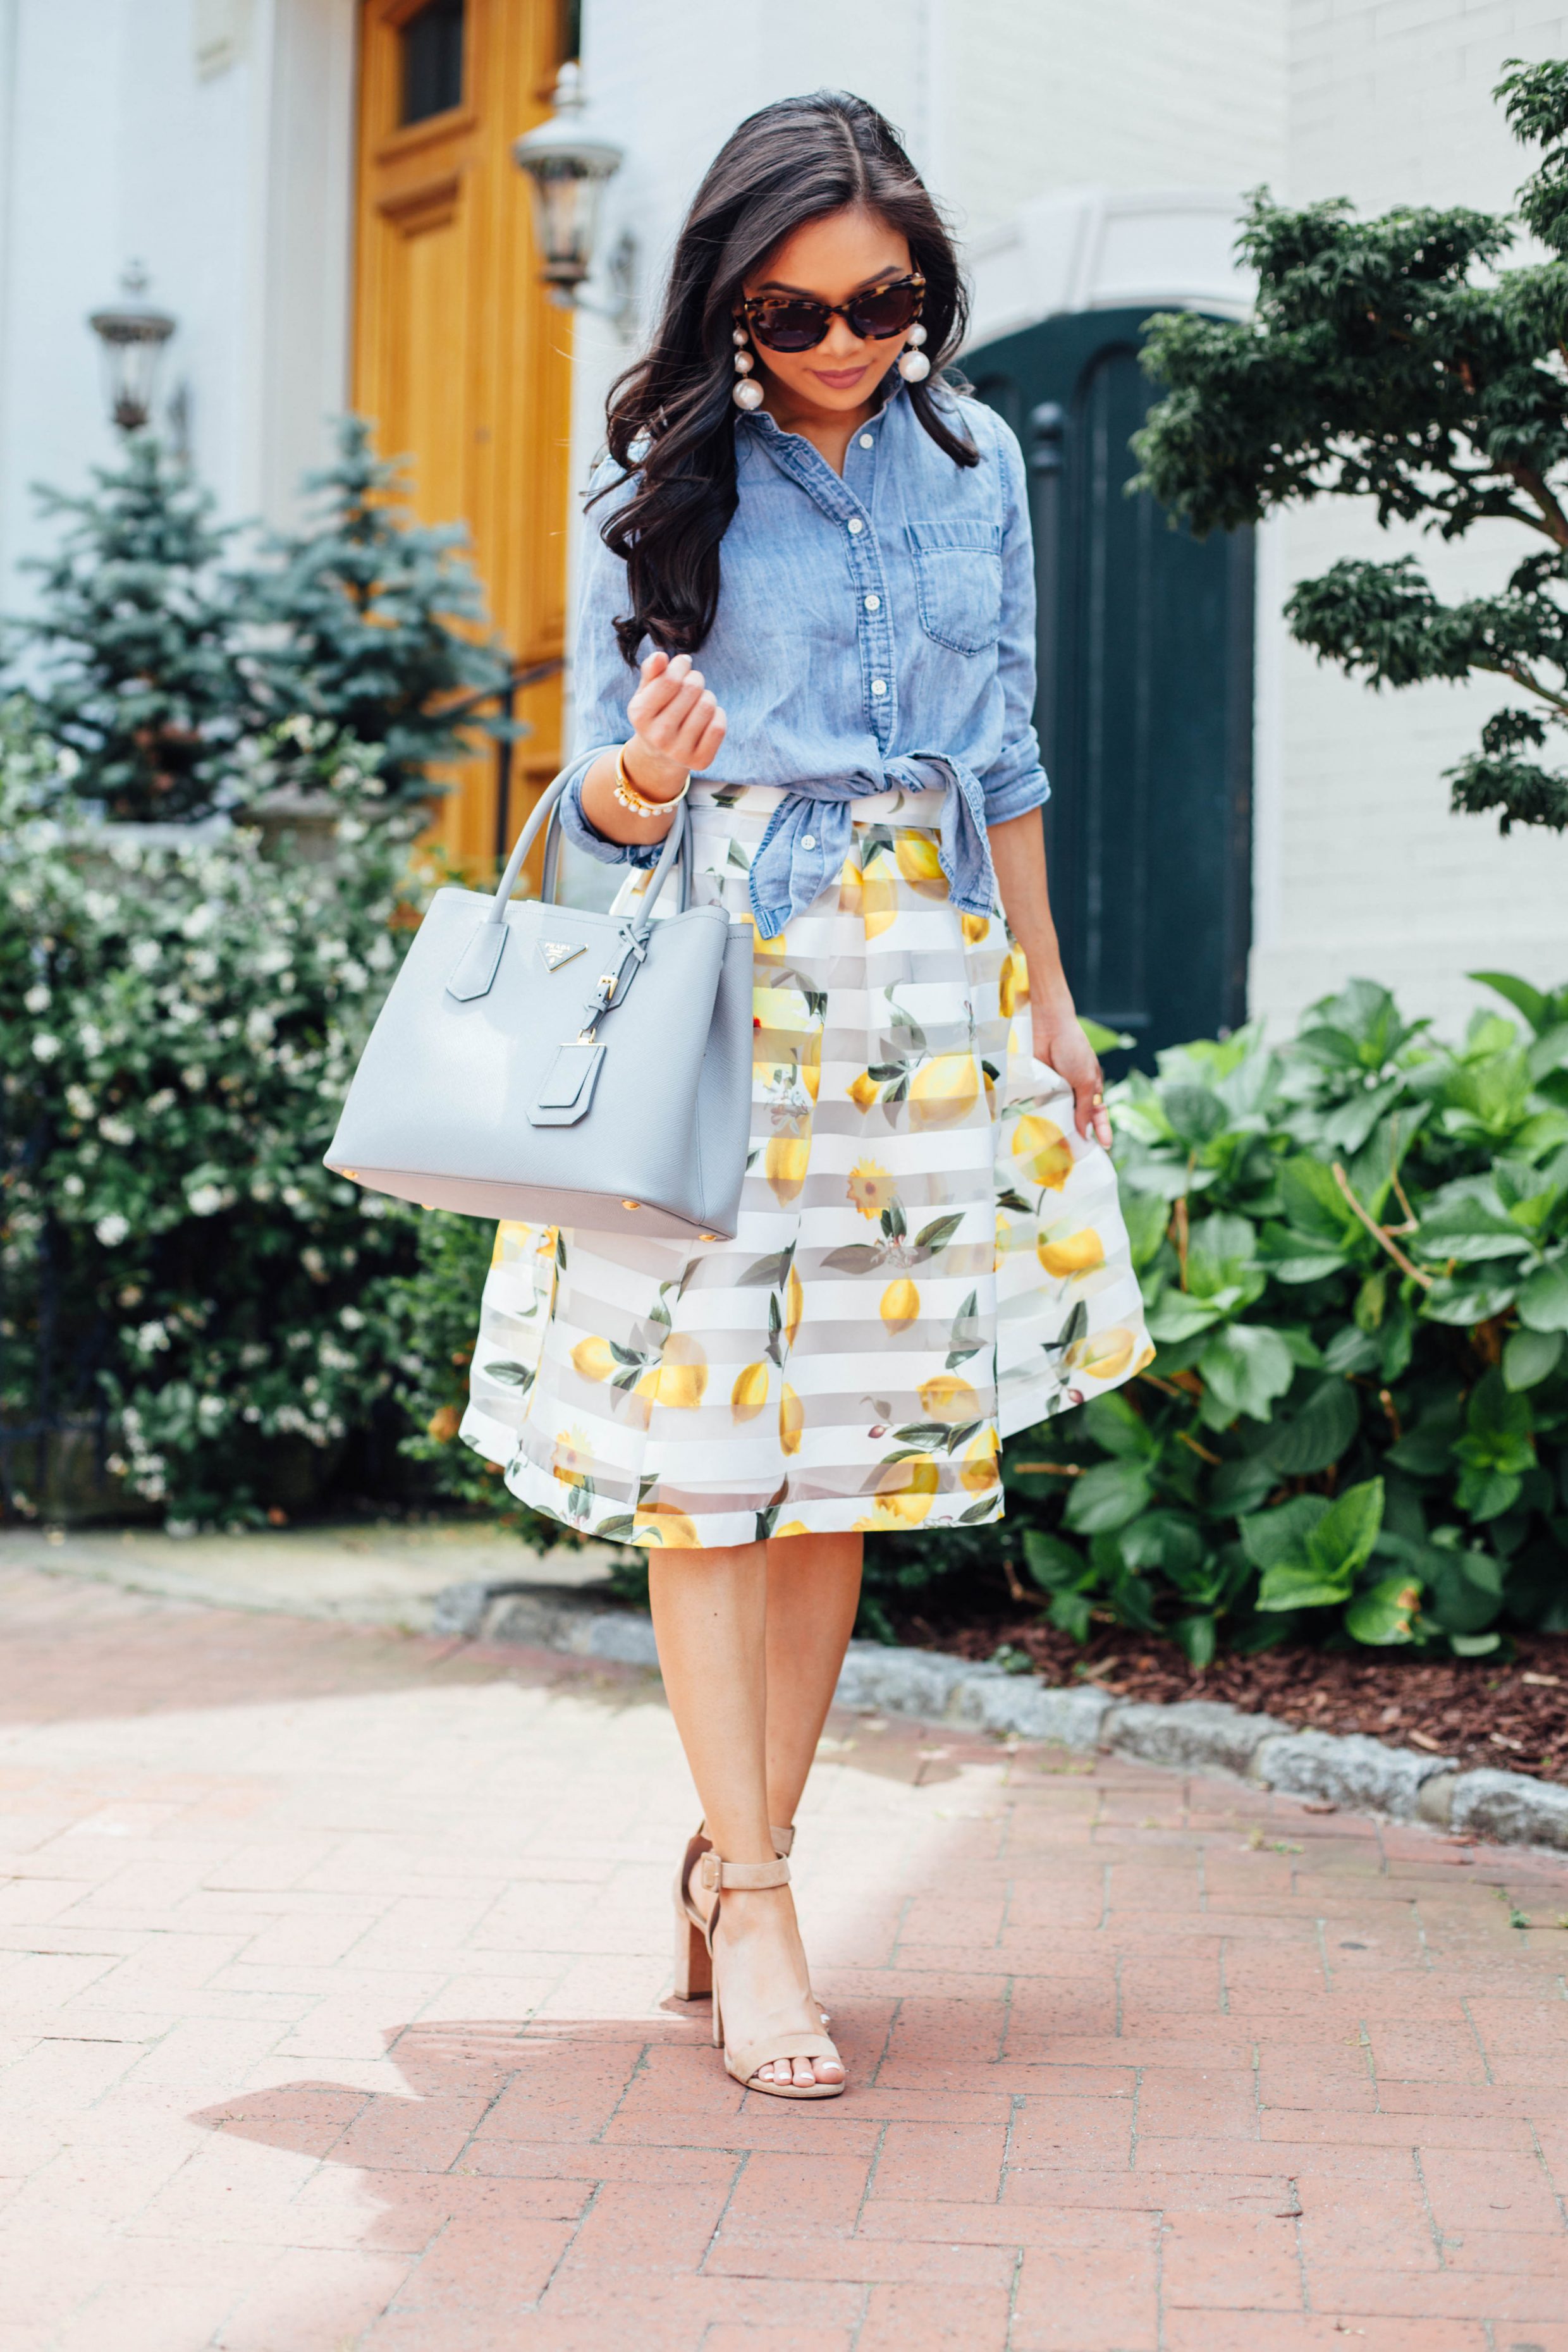 Summer Fresh :: Lemon Print Skirt with a Button Down - Color & Chic